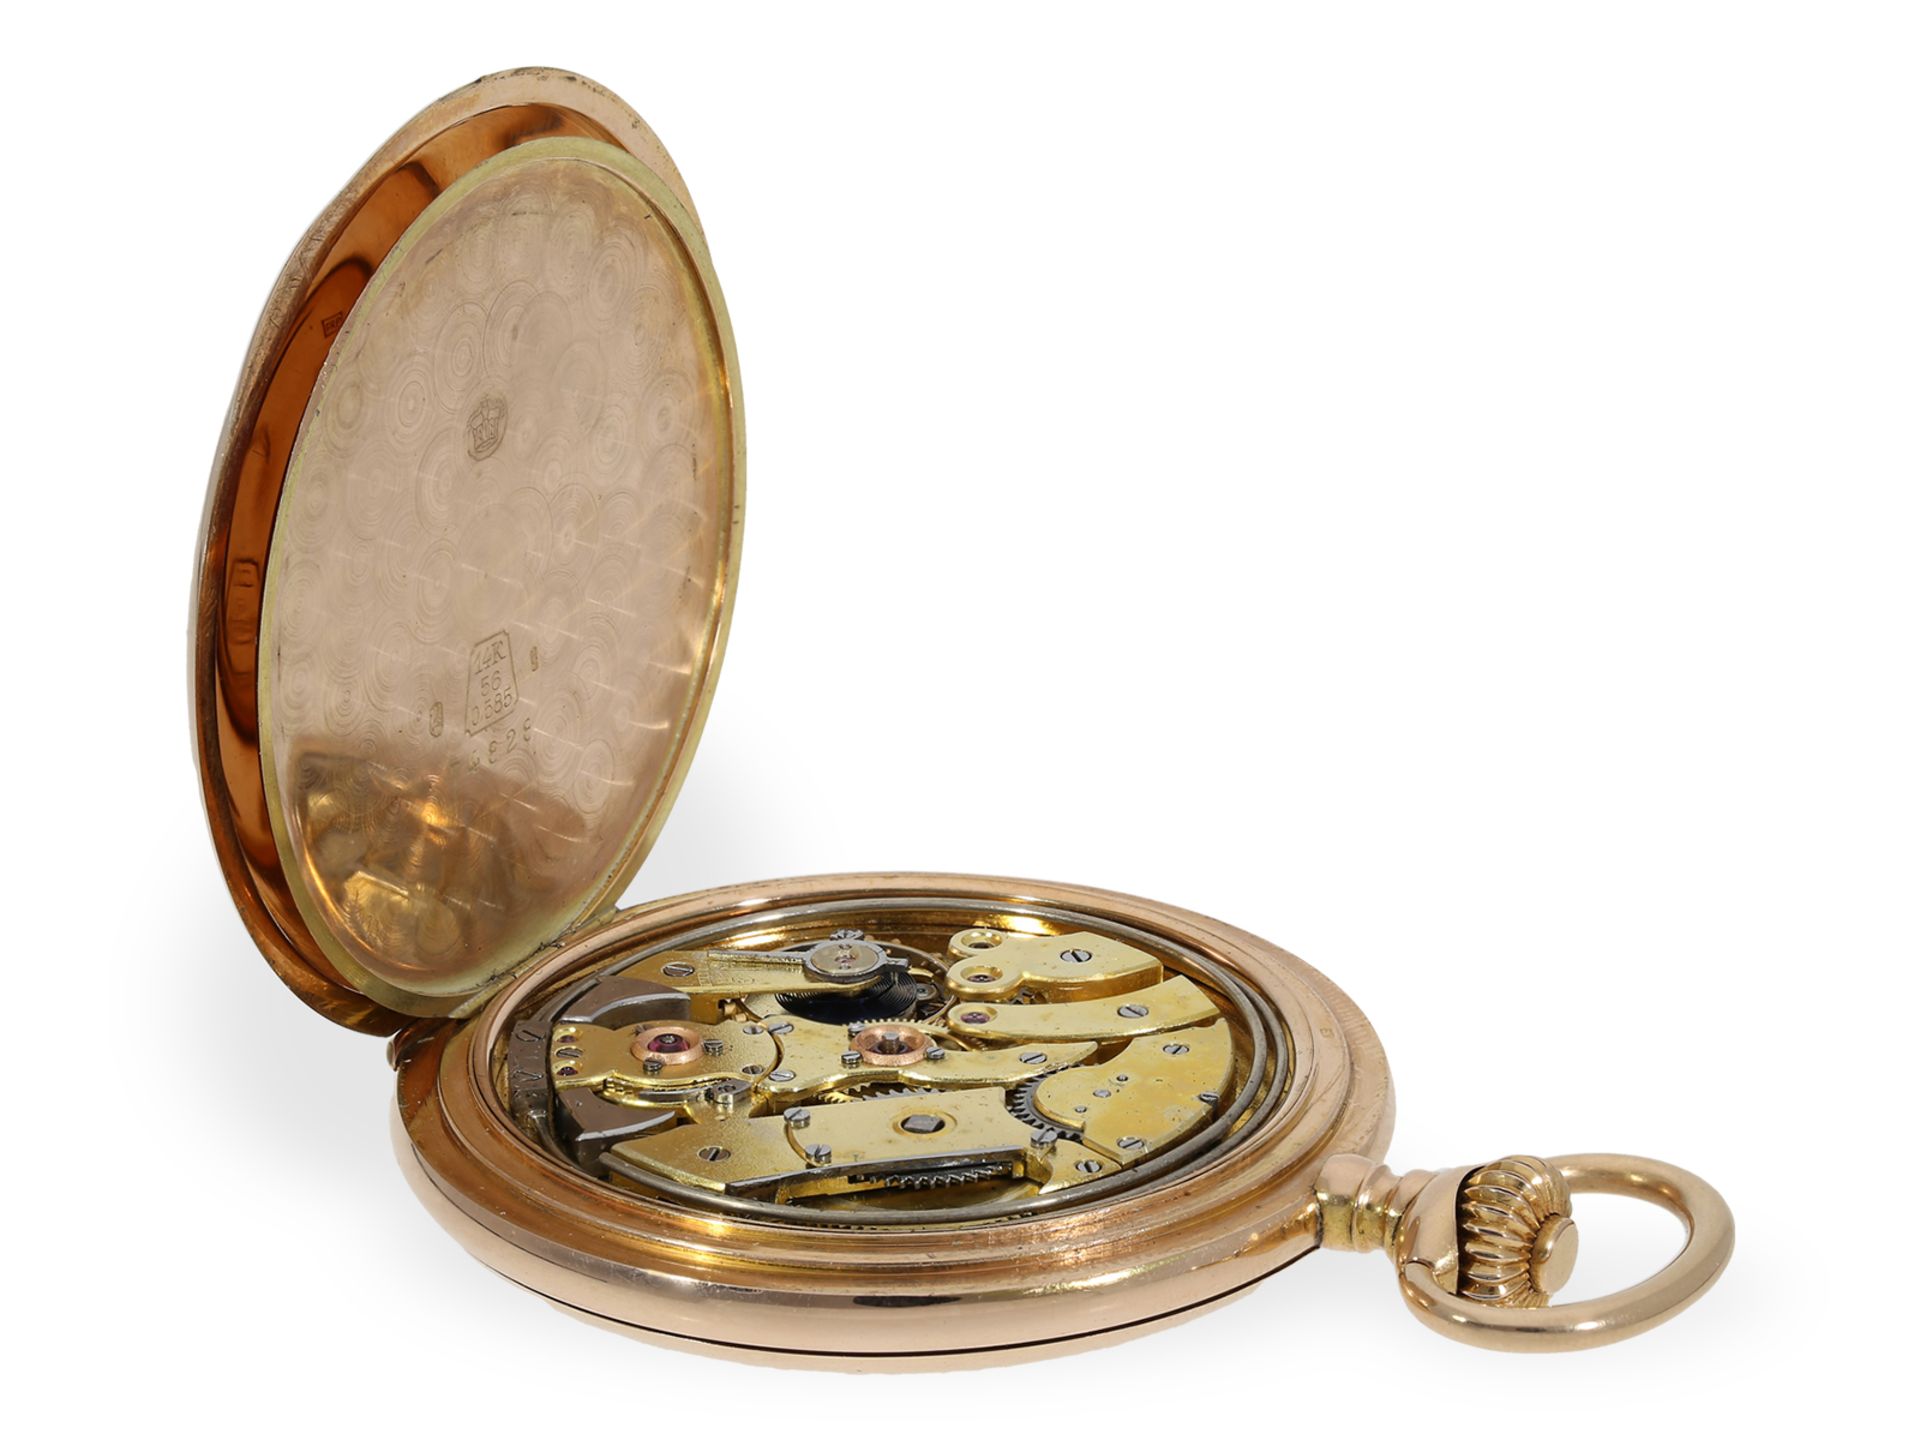 Pocket watch: very fine gold hunting case watch with quarter-hour repeater, probably Piguet calibre, - Image 5 of 6